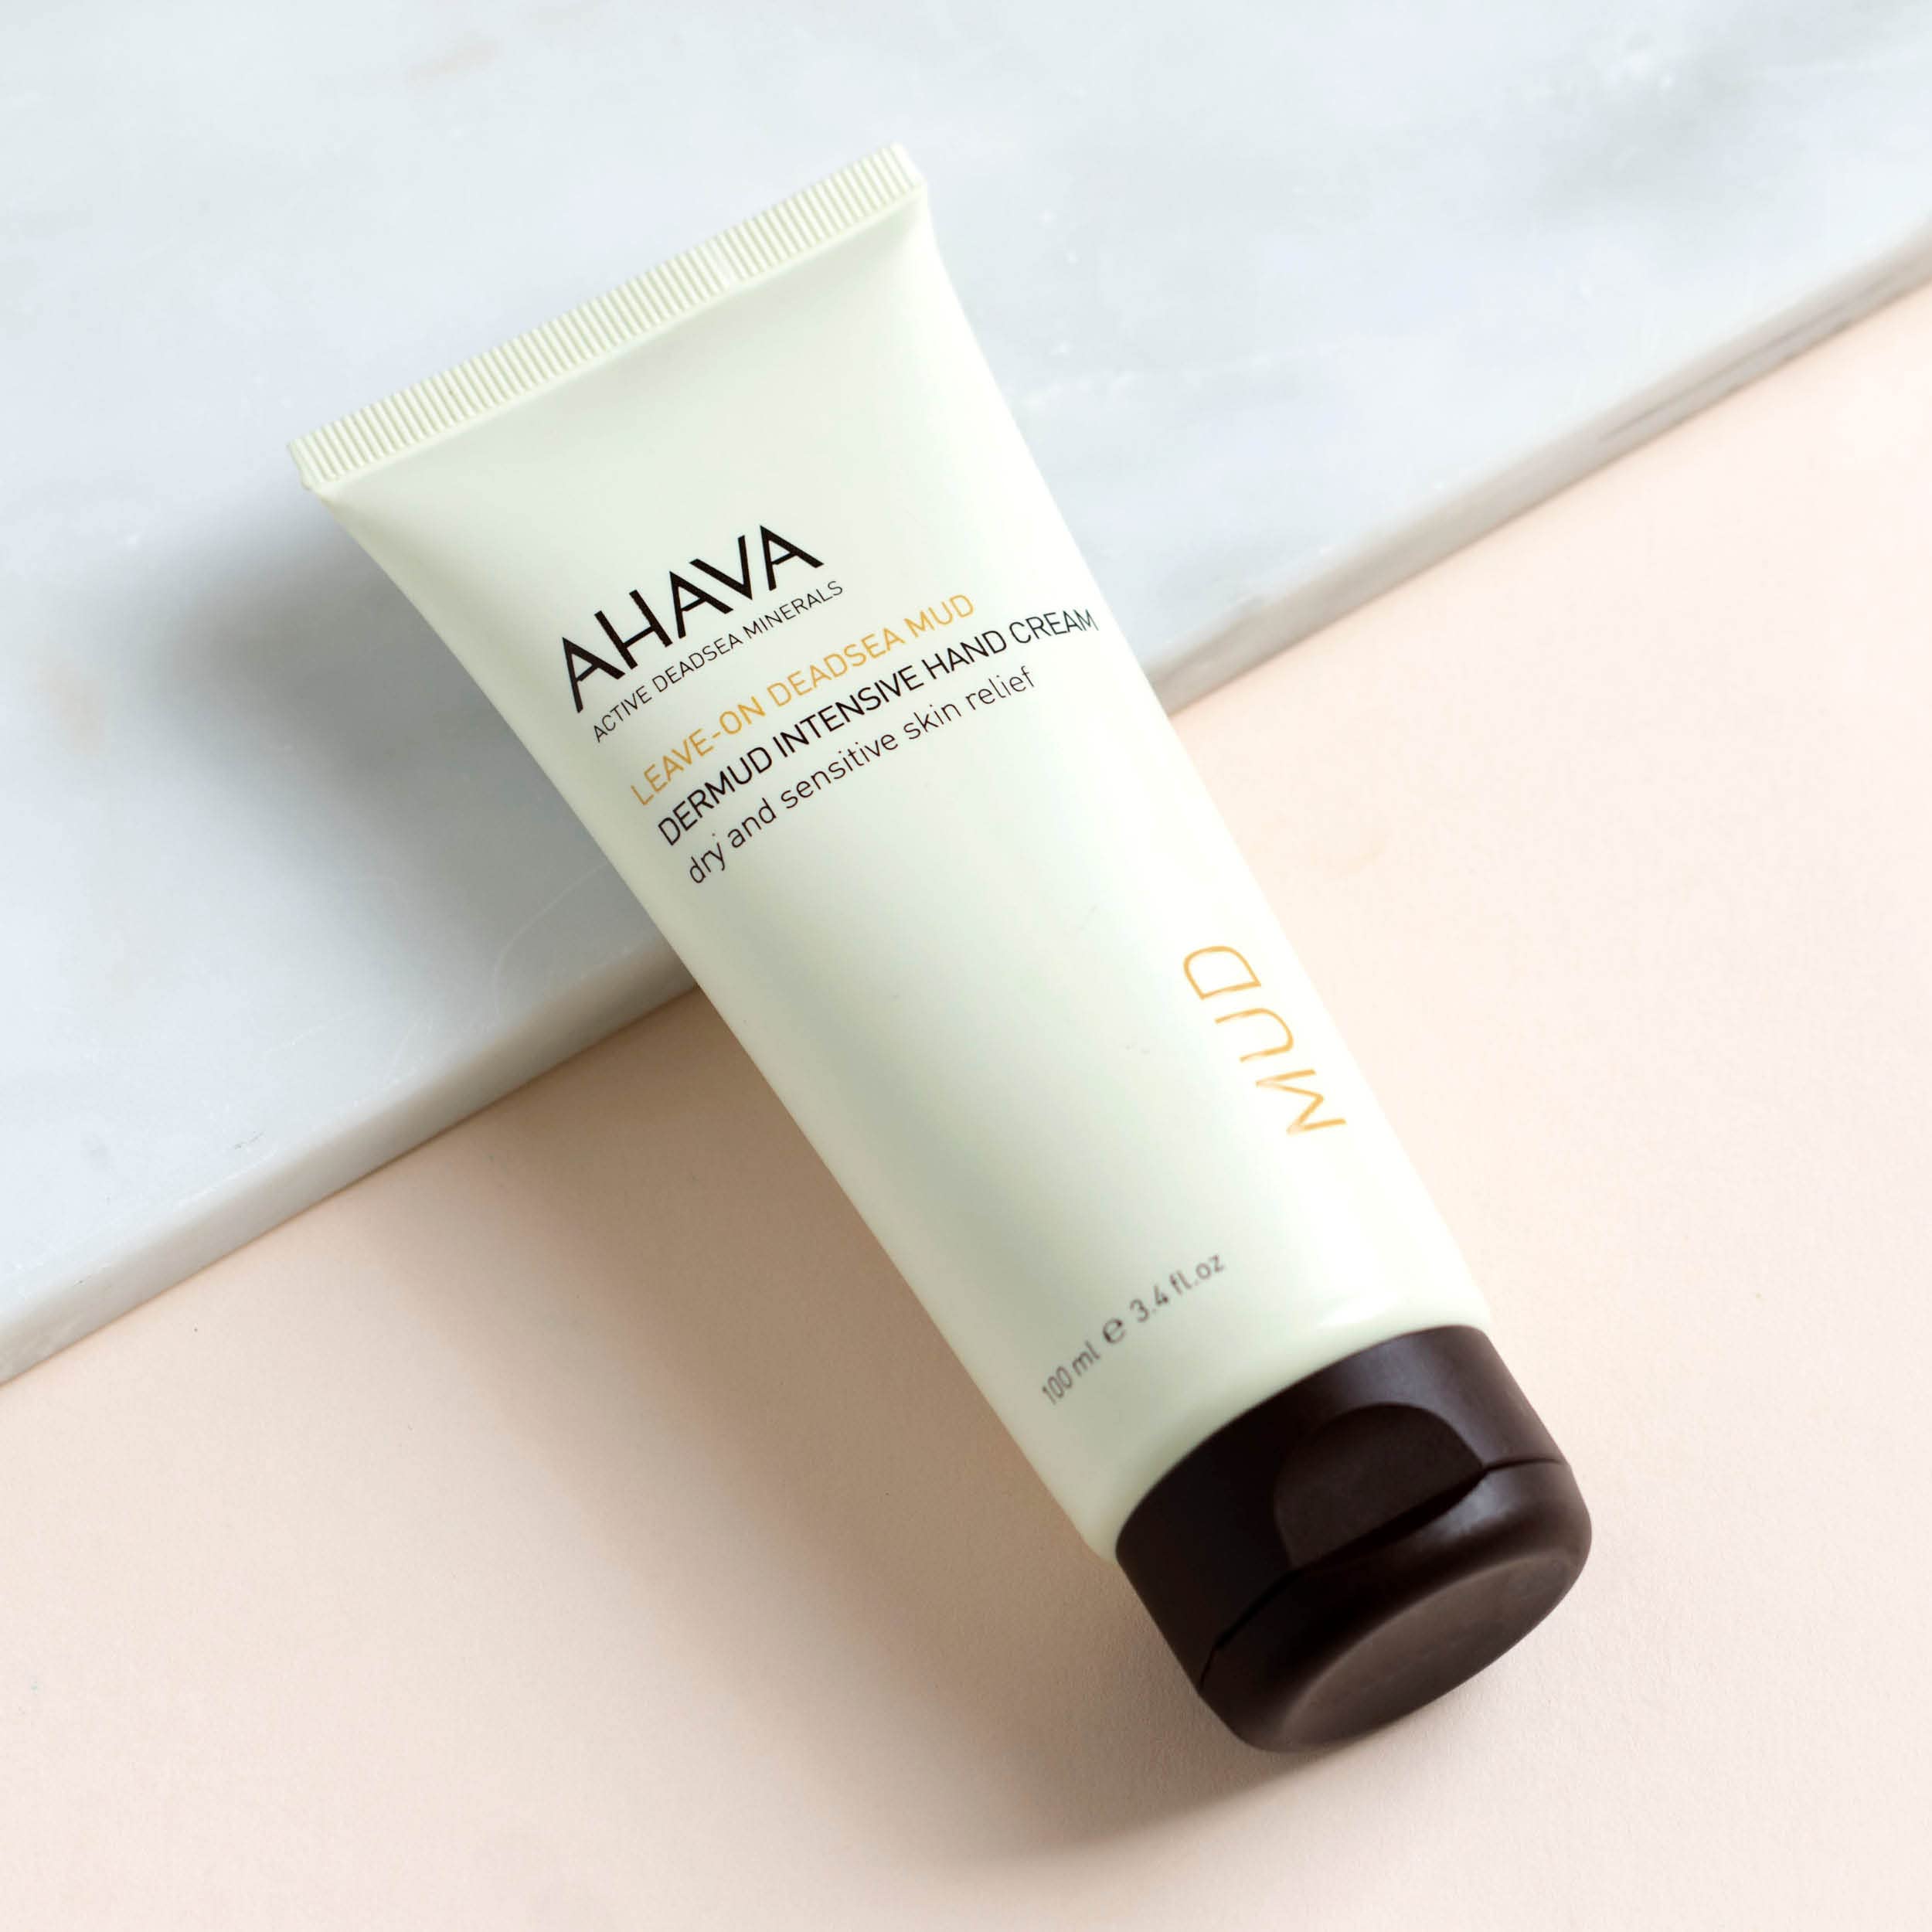 AHAVA Dermud Intensive Hand Cream - Intensely Hydrates, Soothes, Relieves Dry & Sensitive Hands, Enriched by Dermud Mud Complex, Osmoter, Aloe Vera Leaf, Jojoba Seed Oil, Zinc & Allantoin, 3.4 fl.oz